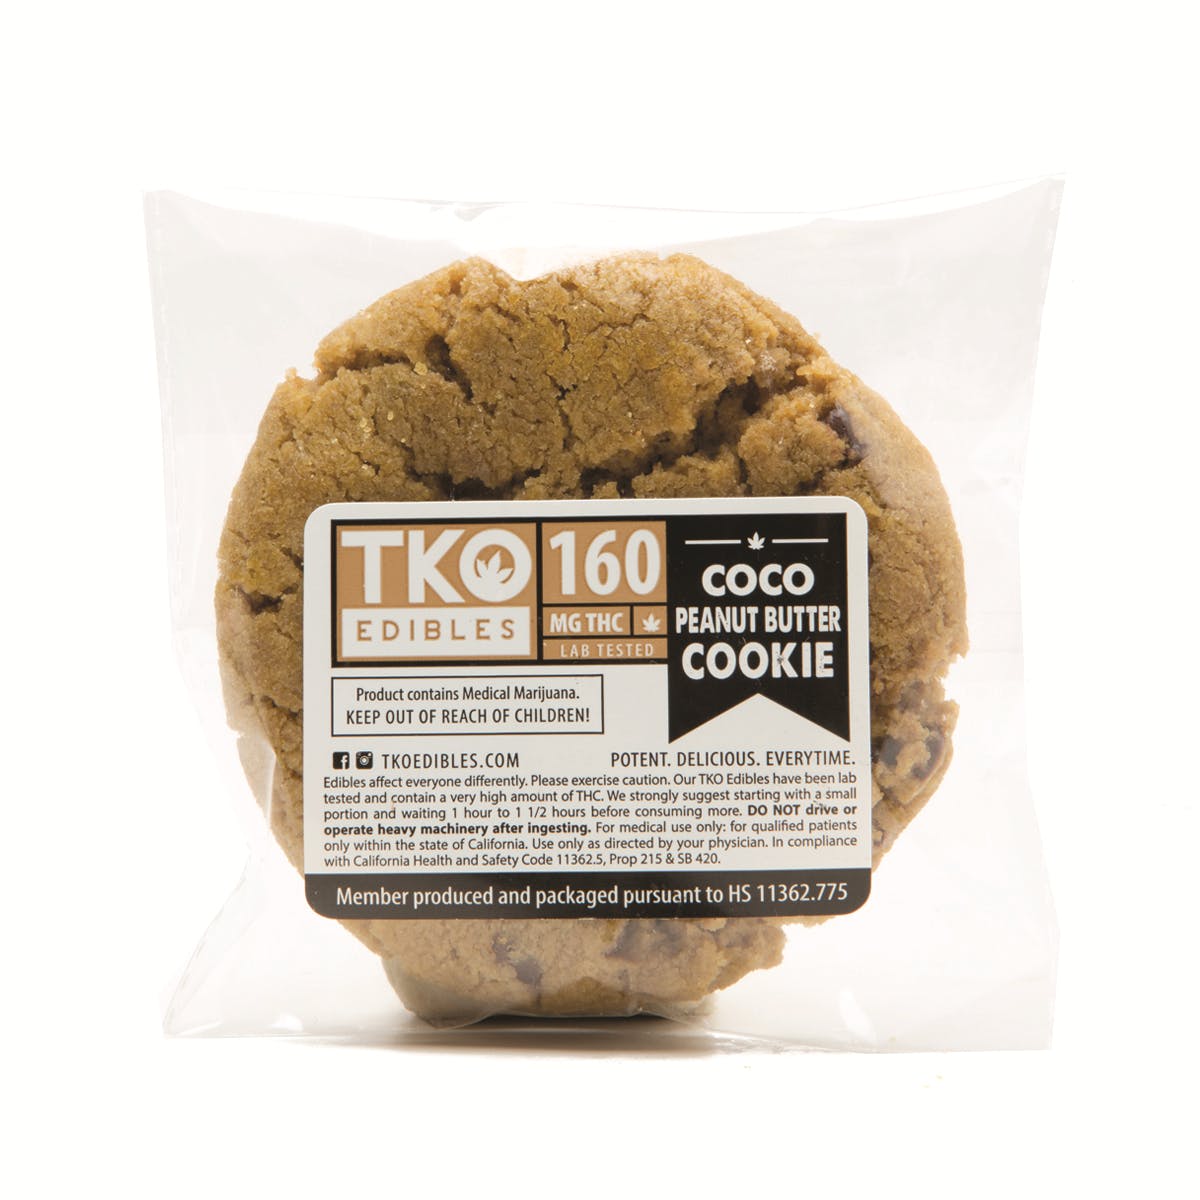 Coco Peanut Butter Cookie